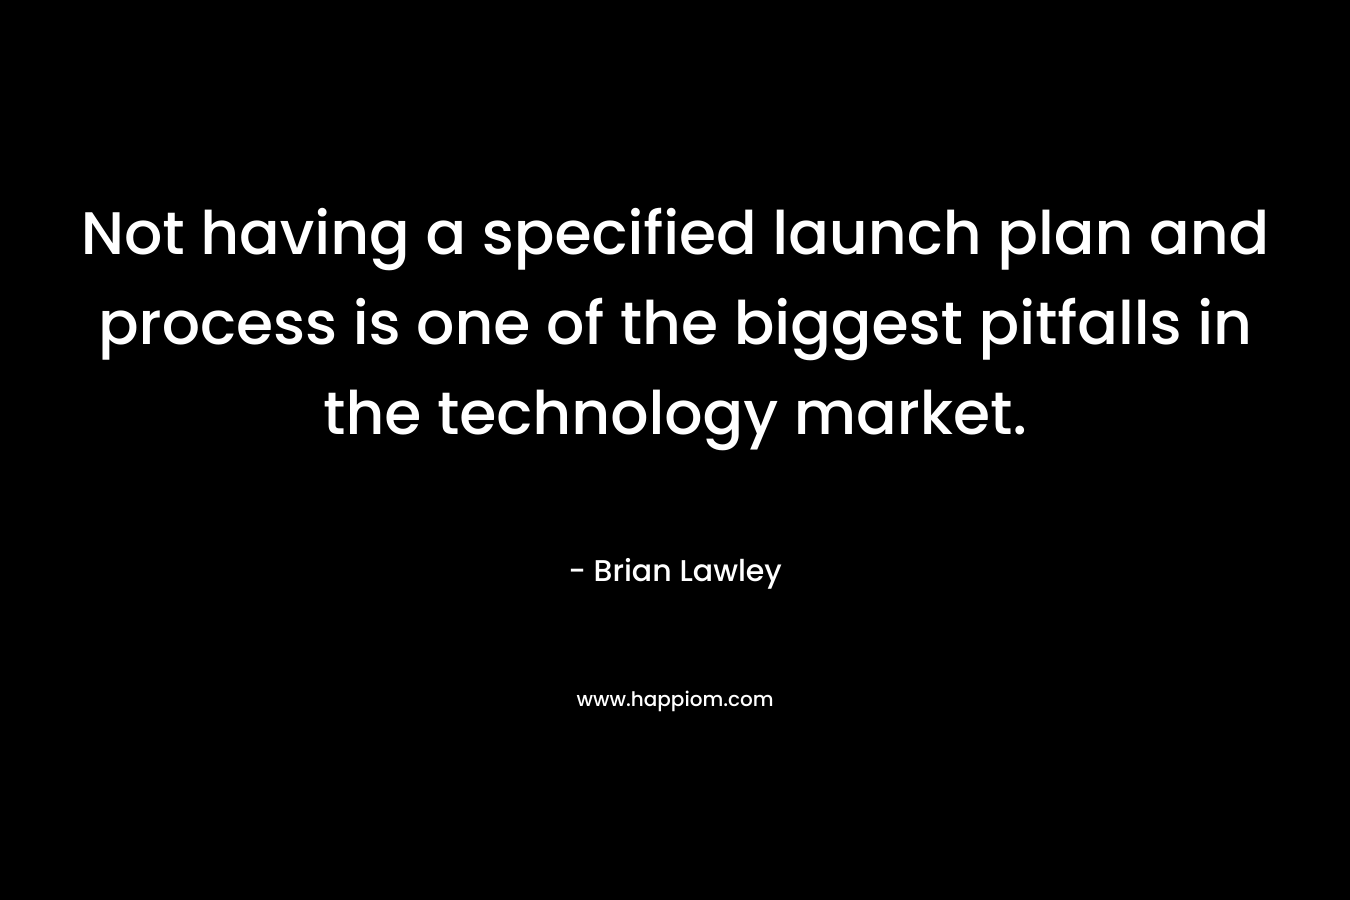 Not having a specified launch plan and process is one of the biggest pitfalls in the technology market. – Brian Lawley